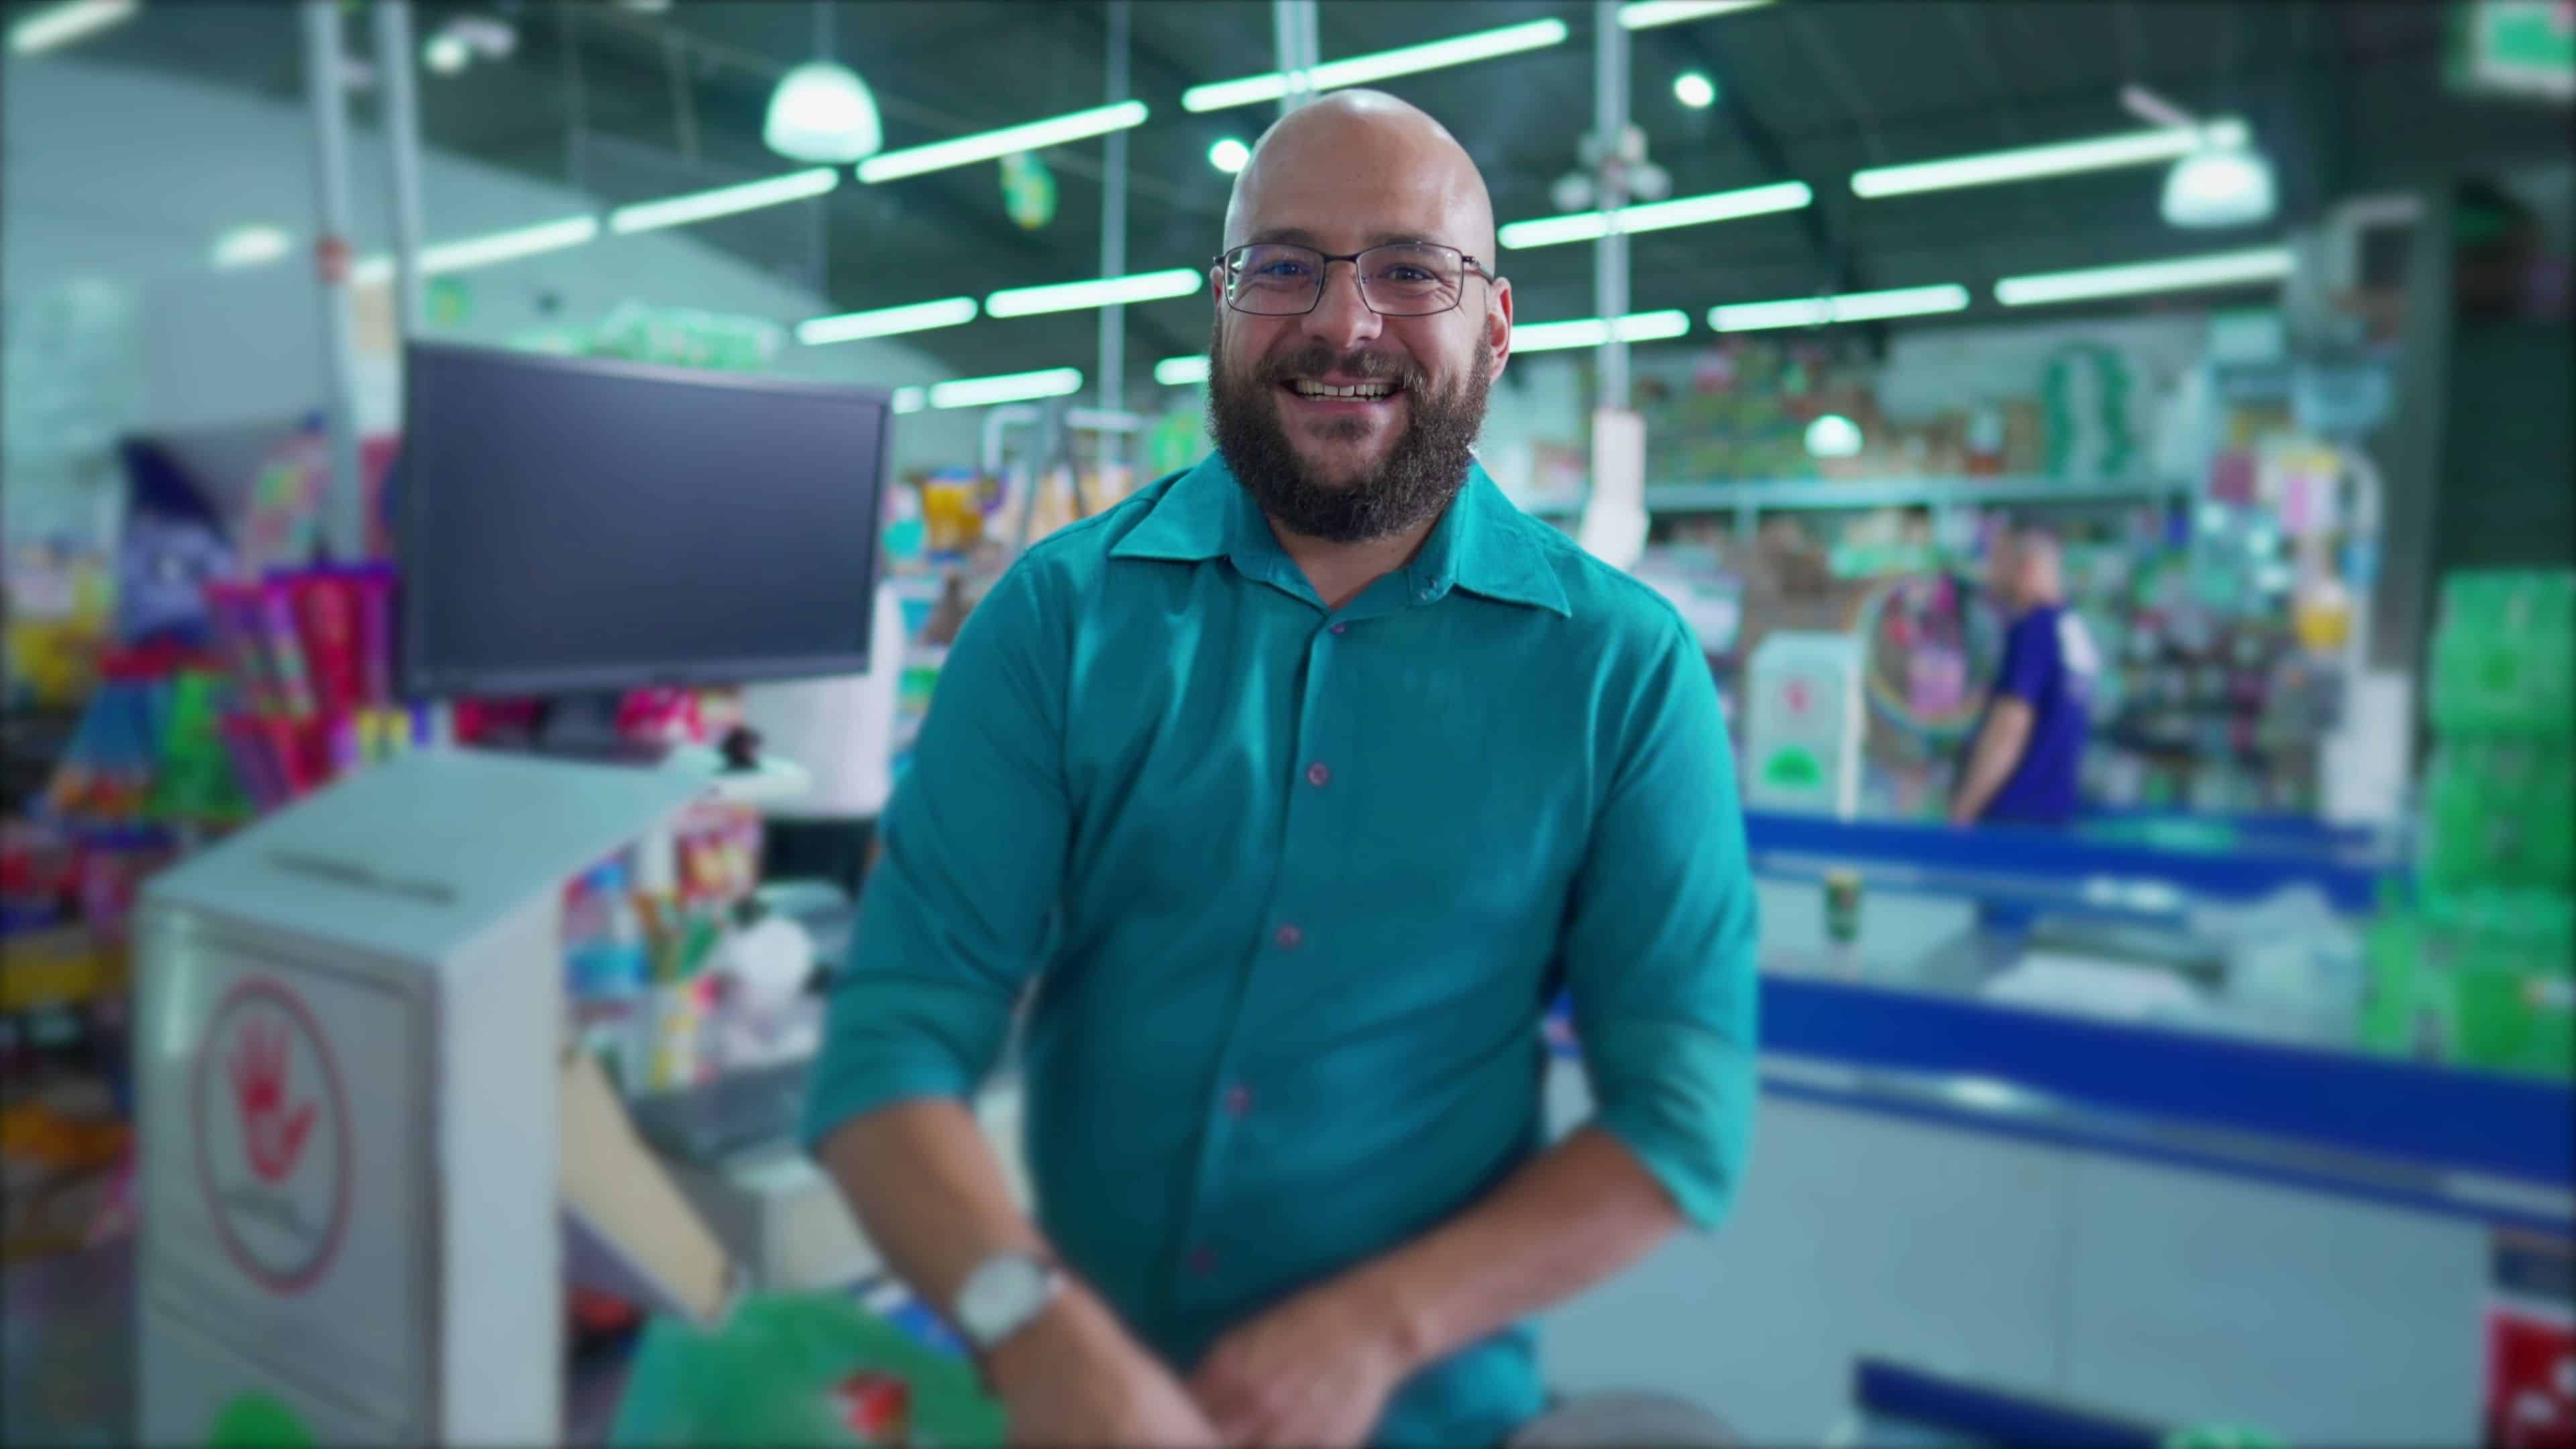 One happy Brazilian employee of supermarket at checkout scanning products and putting into plastic bags while smiling at camera. Grocery Market scene in South America